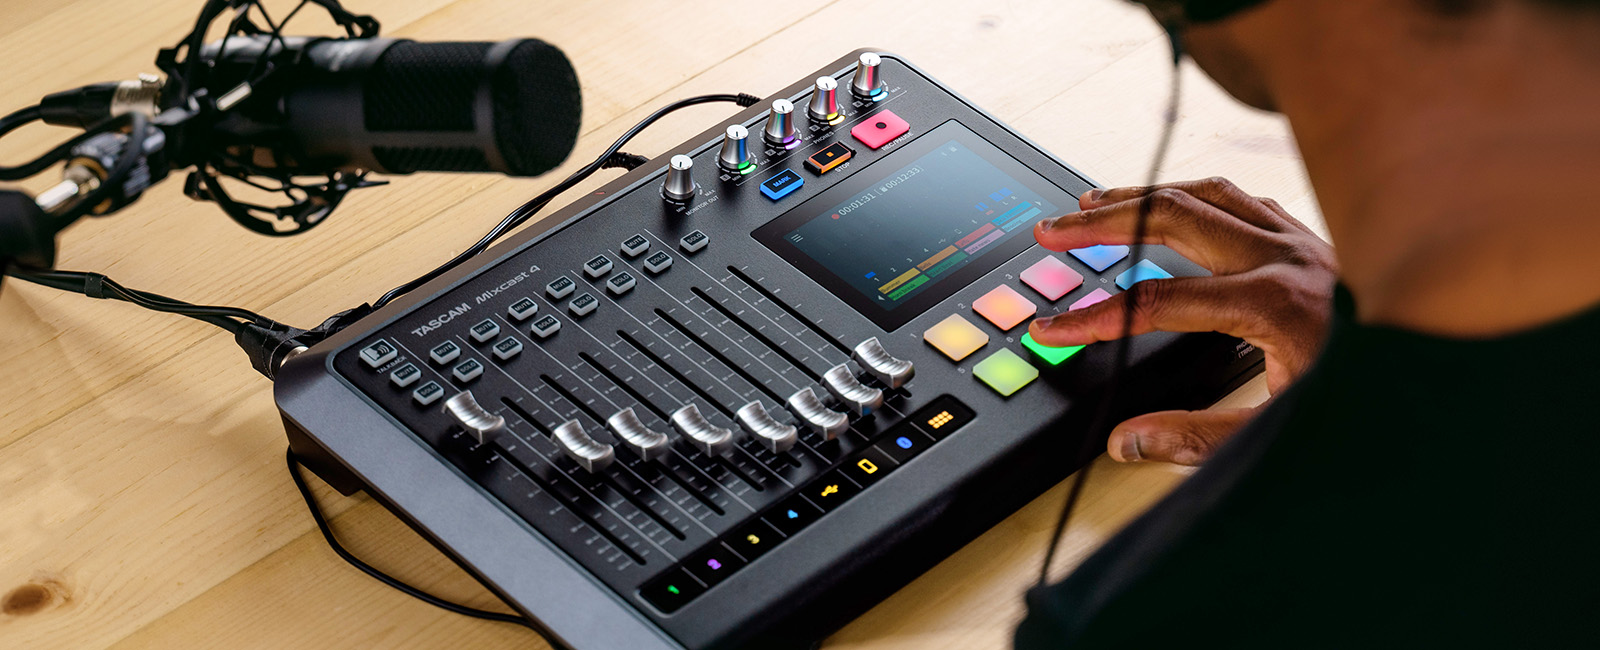 TASCAM Announces the Version 1.30 Firmware Update for the Mixcast 4 Podcast Station